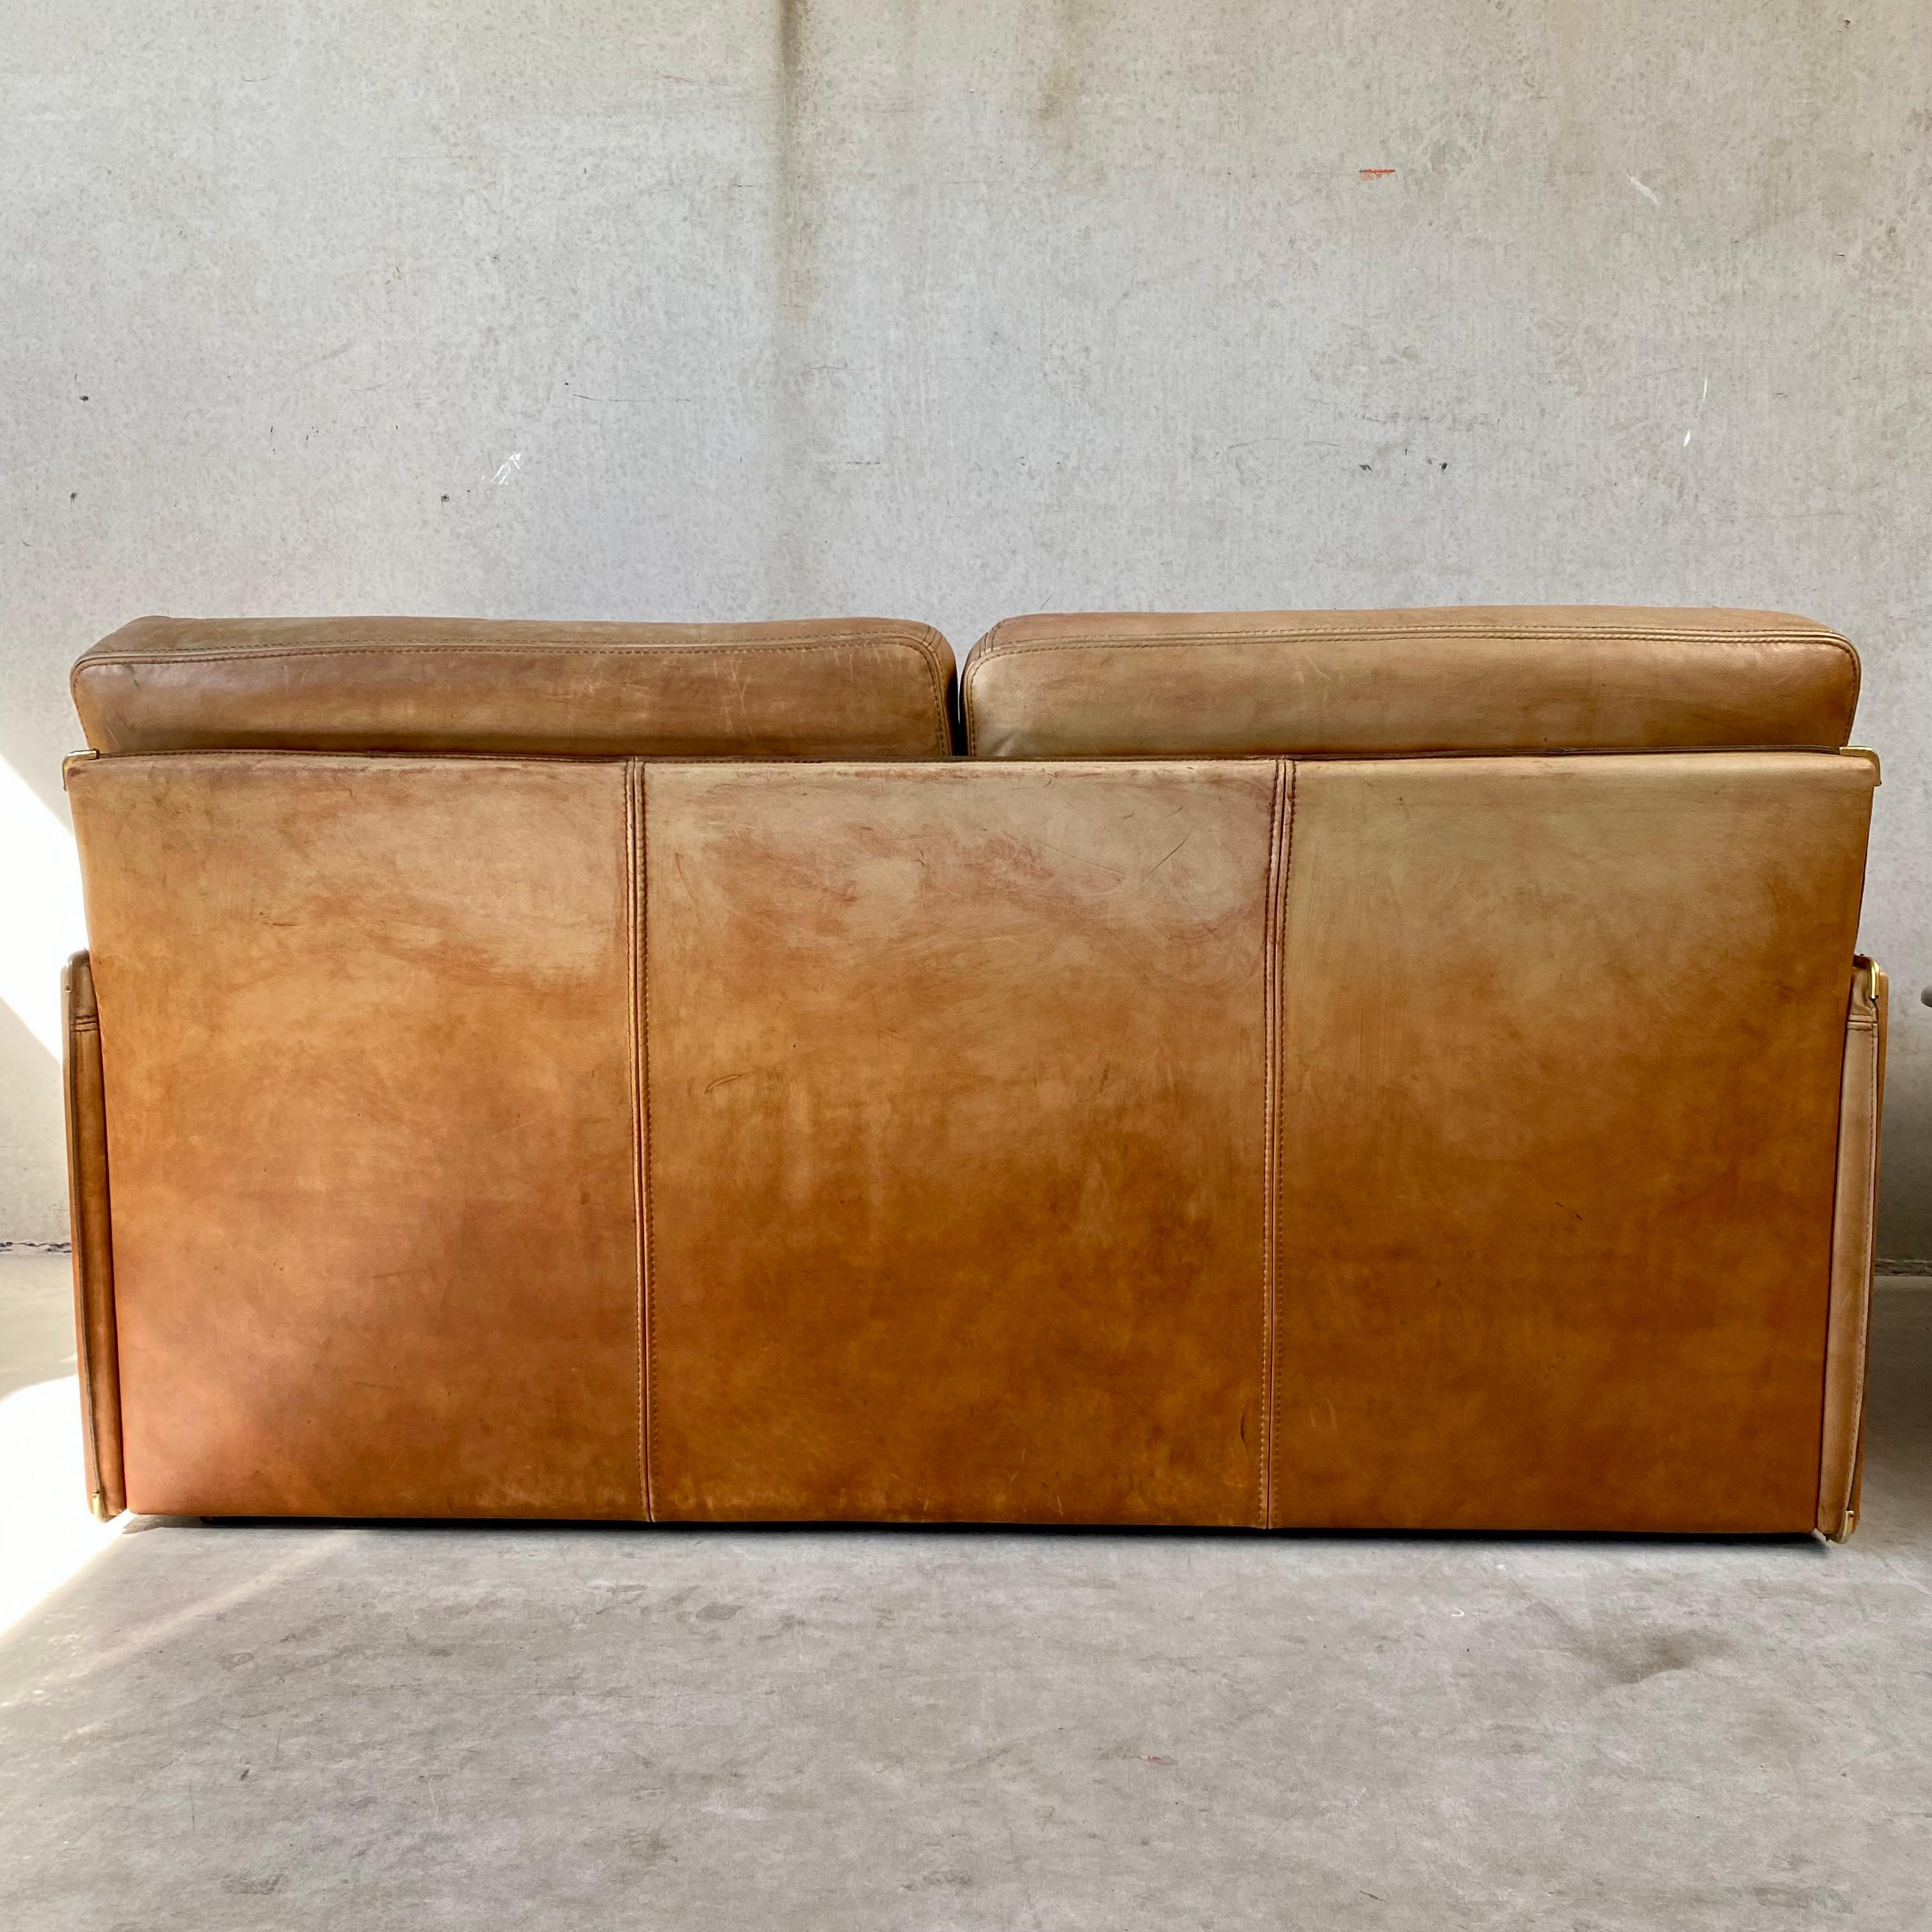 Cognac Leather 2-Seater Sofa by MarCo Milisich for Baxter, Italy, 1970 For Sale 2